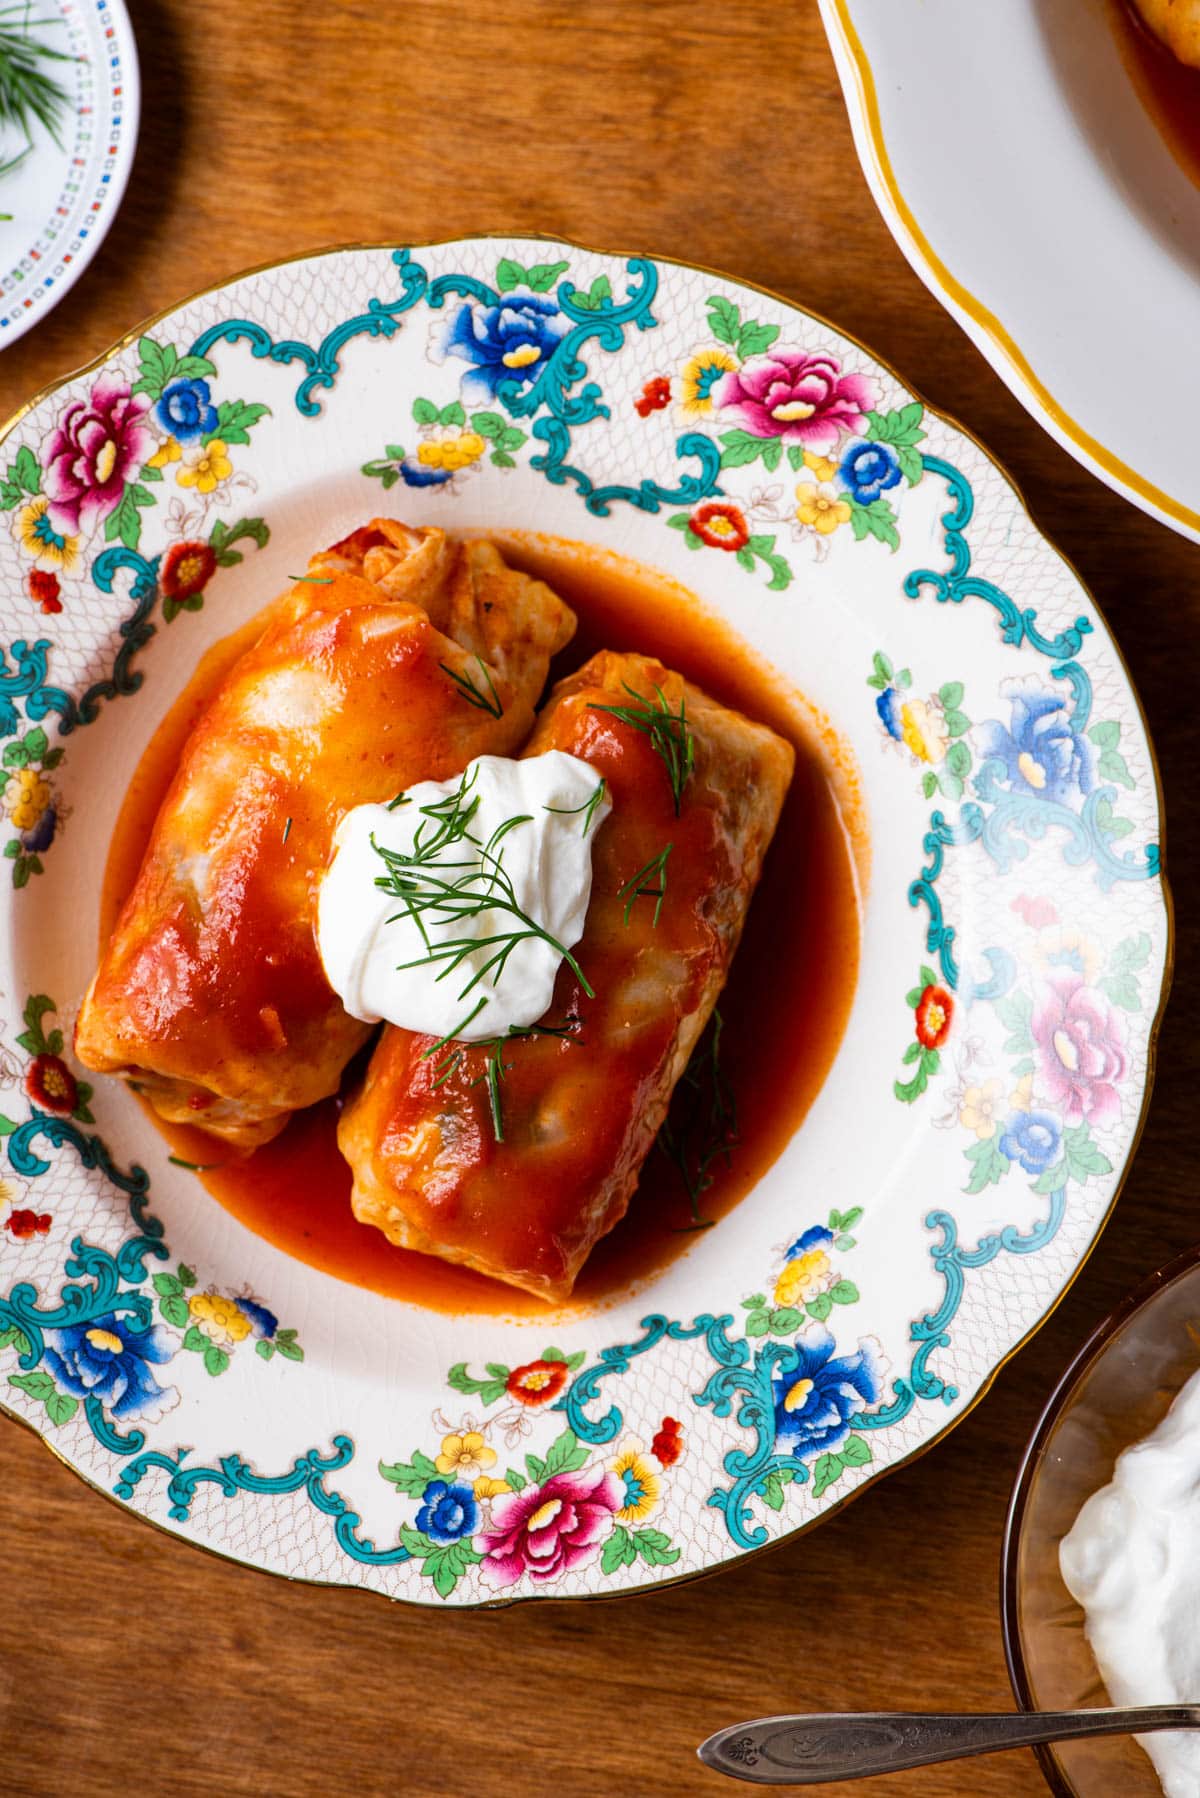 Vegetarian golubtsi (stuffed cabbage rolls) with tomato sauce, sour cream, and dill on a vintage plate.